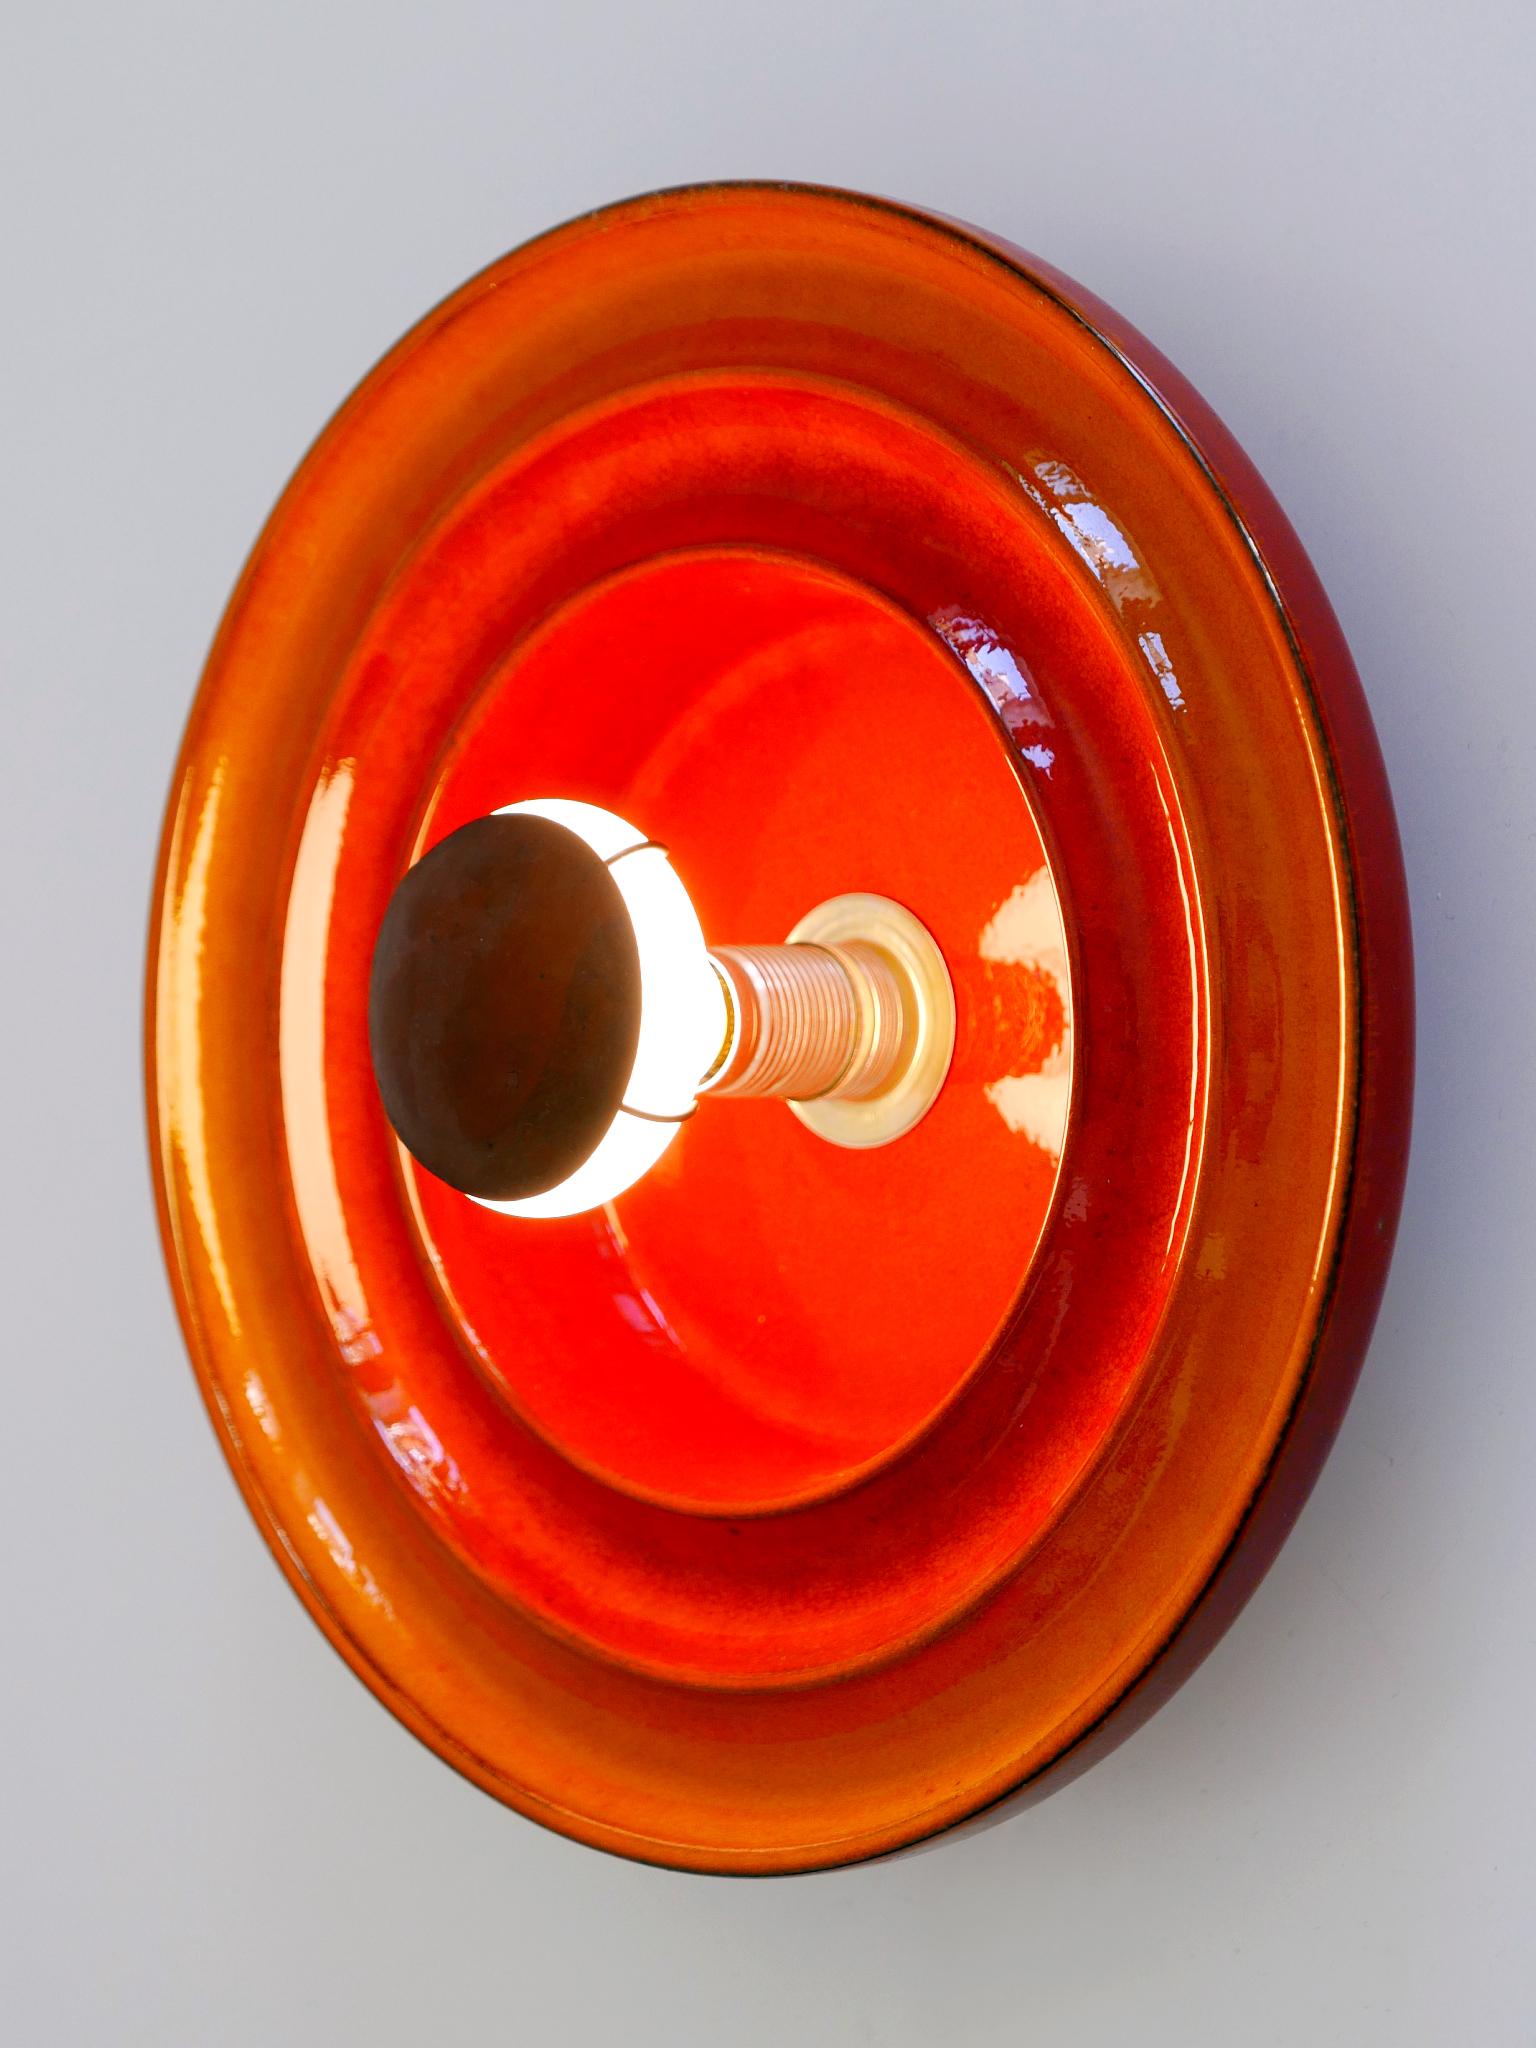 Highly Decorative Mid Century Modern Ceramic Sconce or Wall Light Germany 1960s For Sale 5